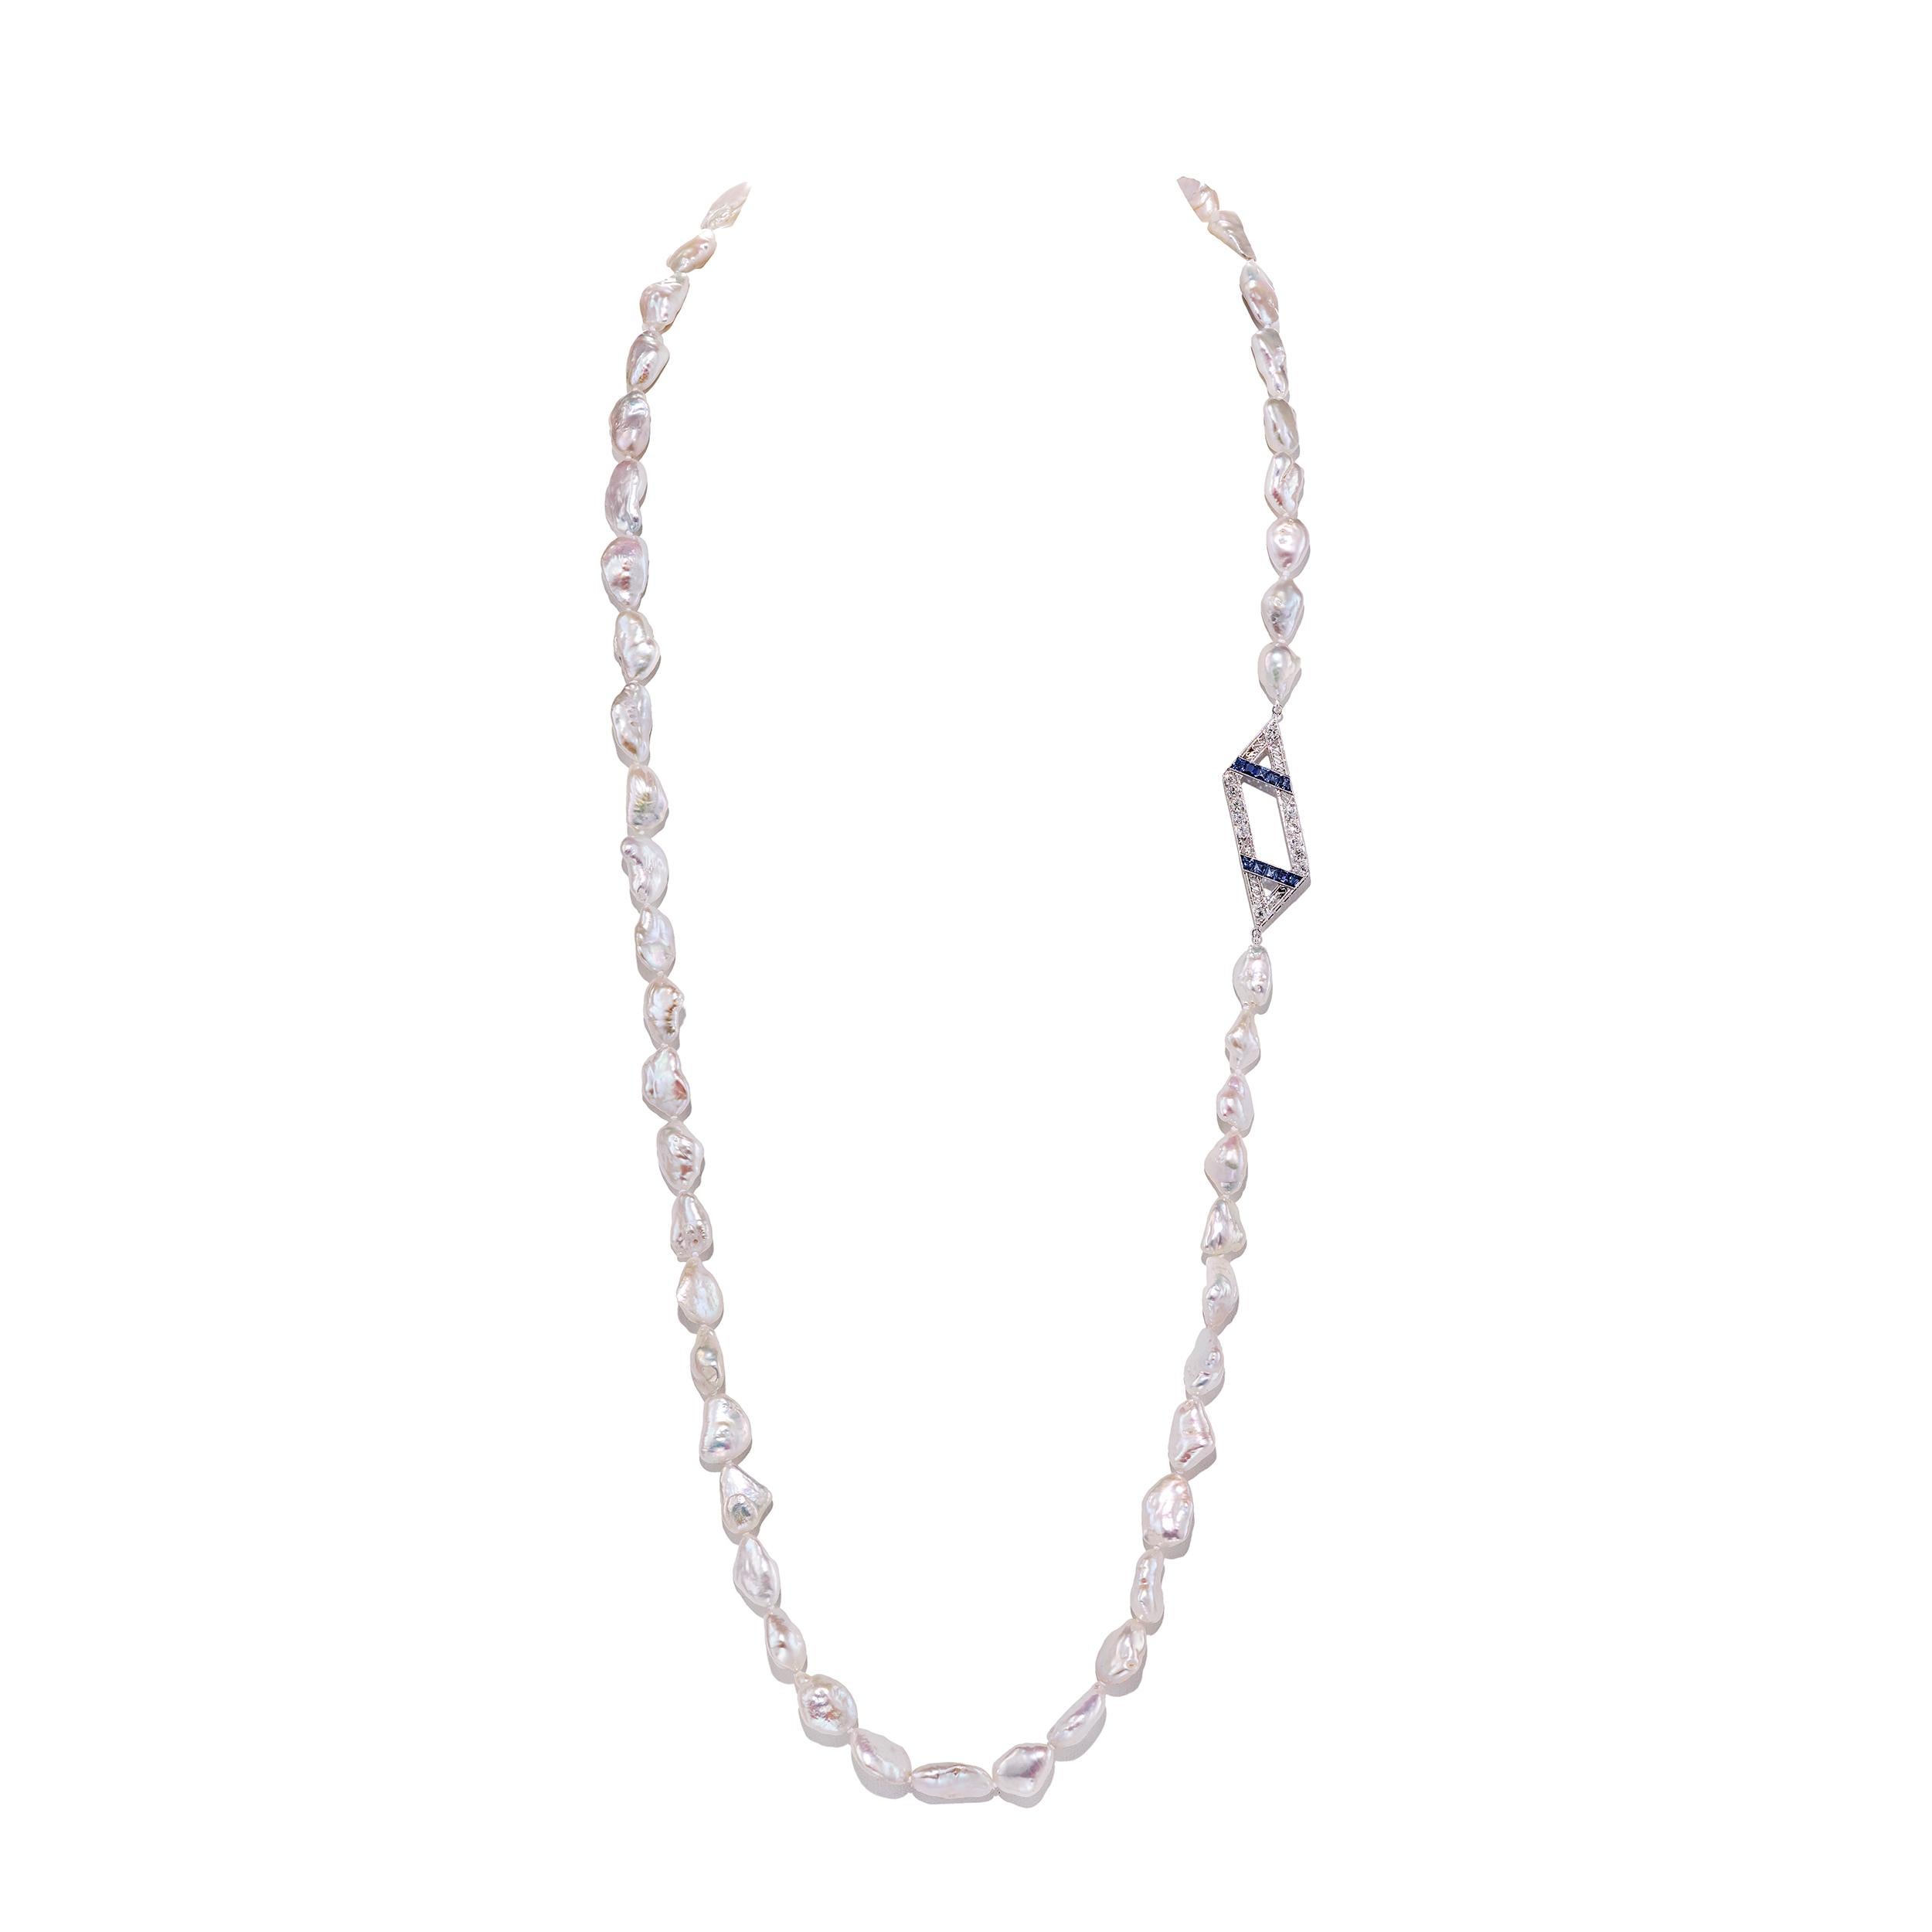 3.5 Carats Diamonds and Sapphires in Platinum with South Sea Pearl Necklace For Sale